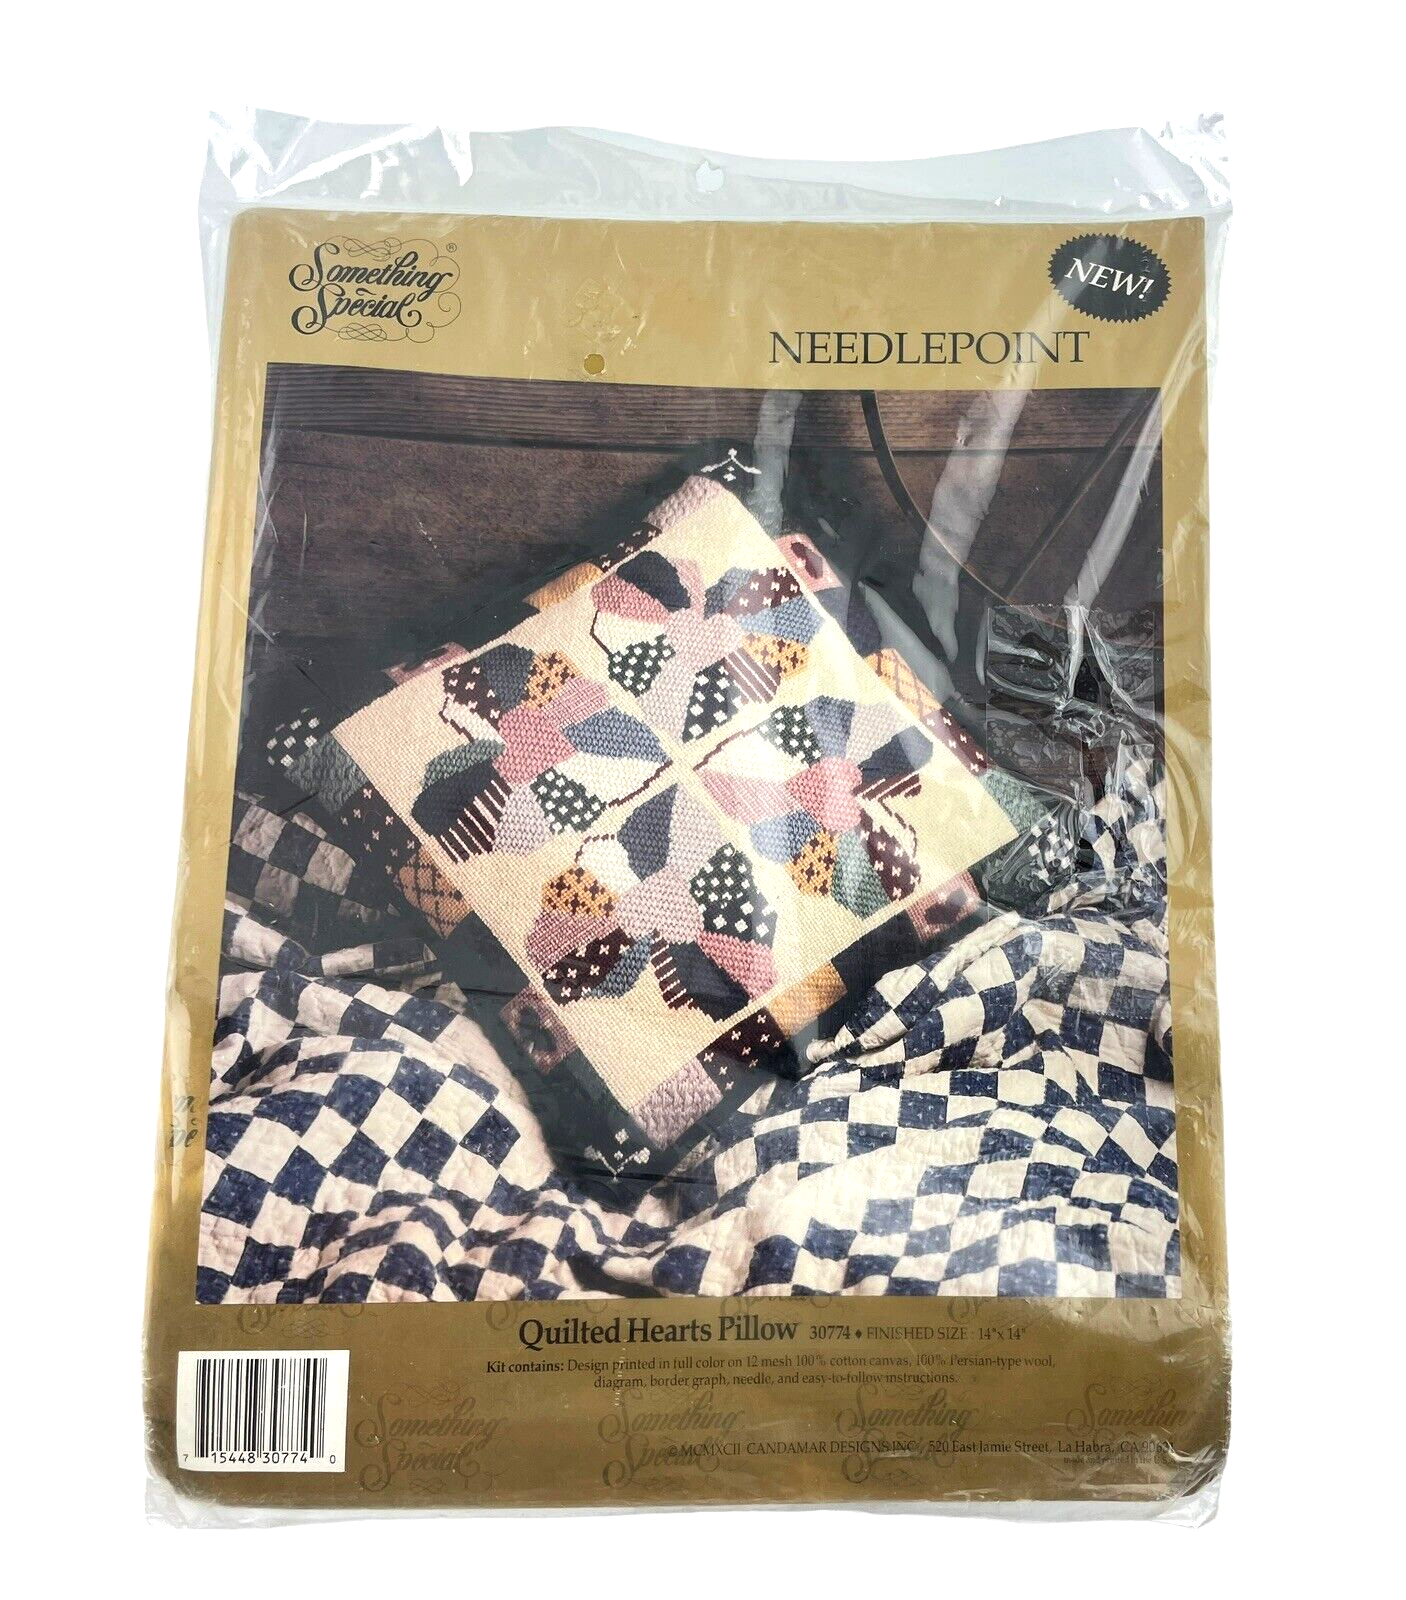 Something Special Needlepoint Quilted Hearts Pillow Front Kit 30774 14" x 14" - $28.87